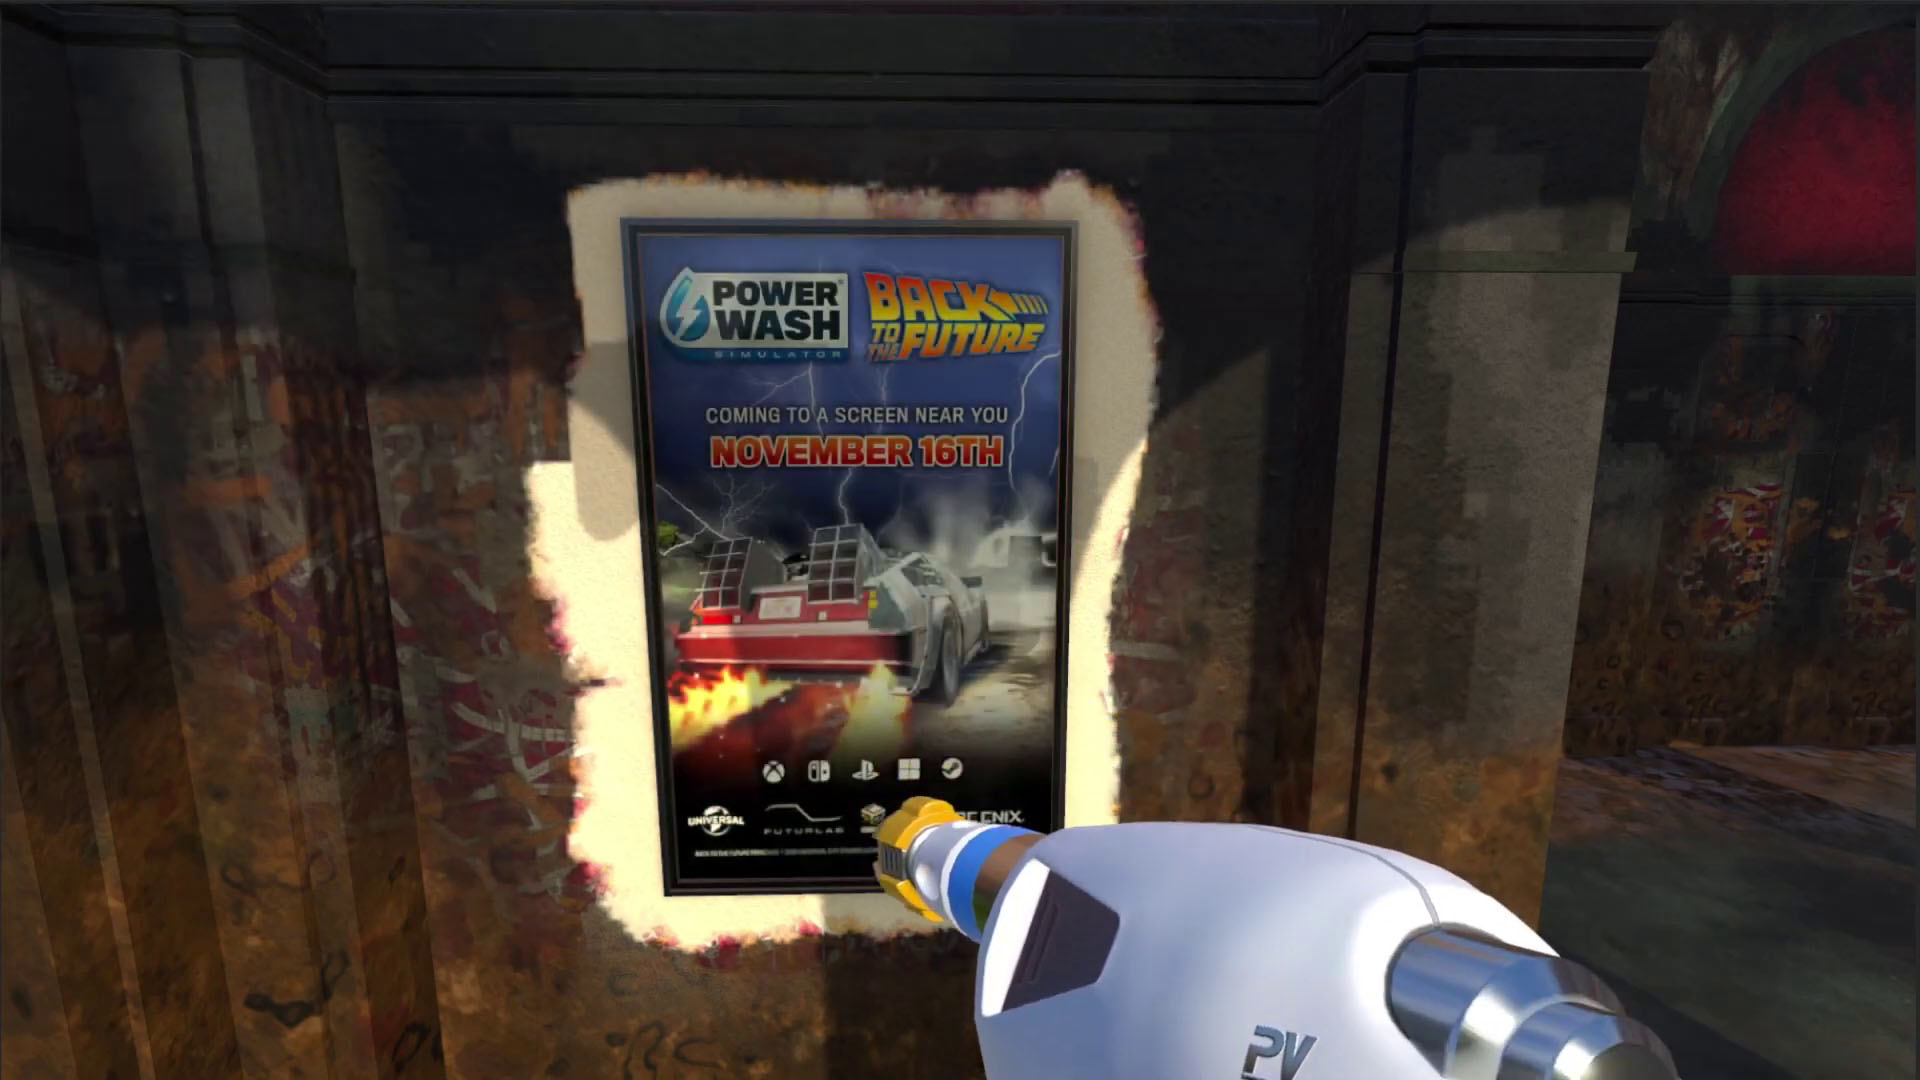 PowerWash Simulator Back to the Future Special Pack, PC - Steam